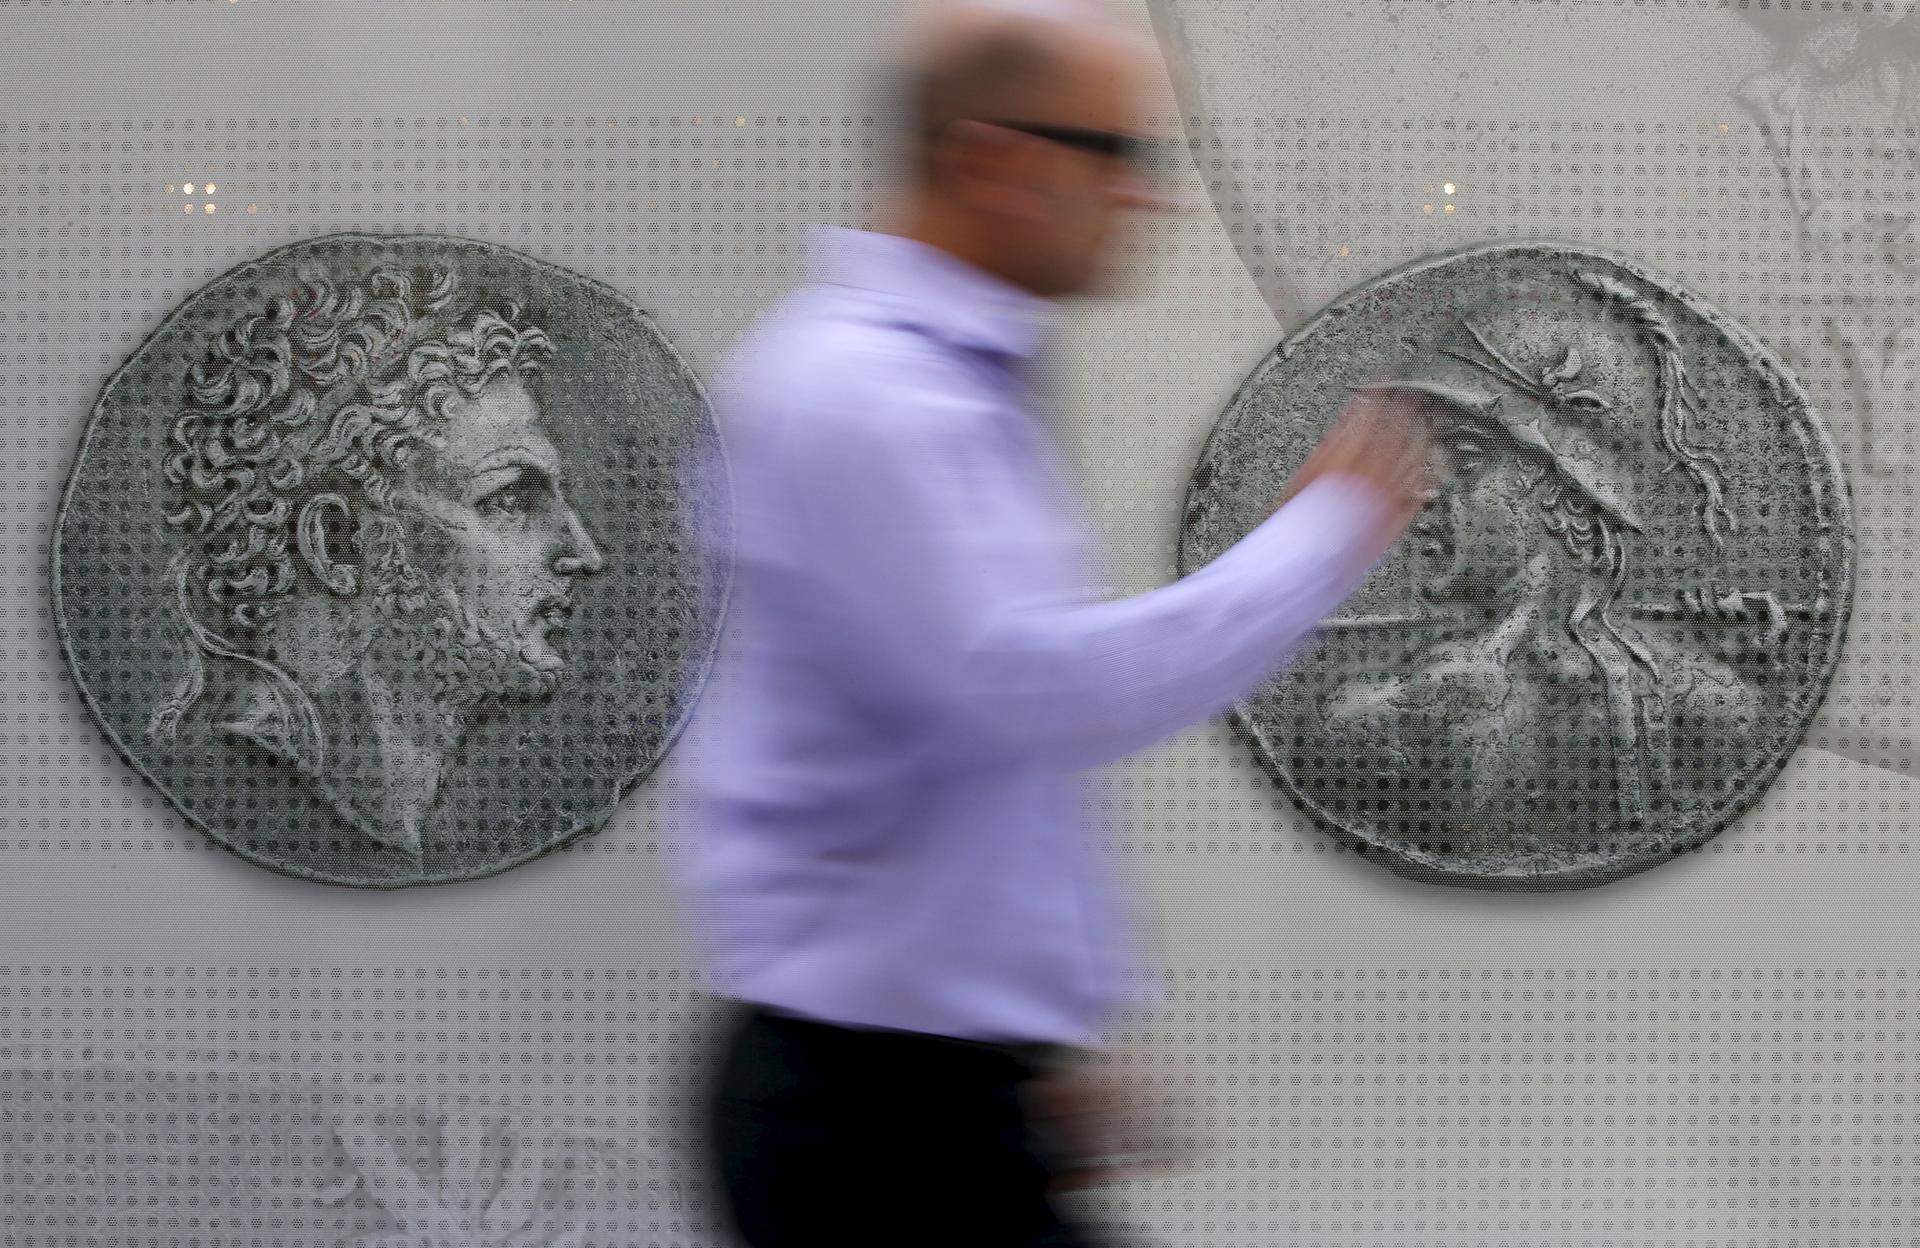 A man walks past pictures of ancient coins in central Athens